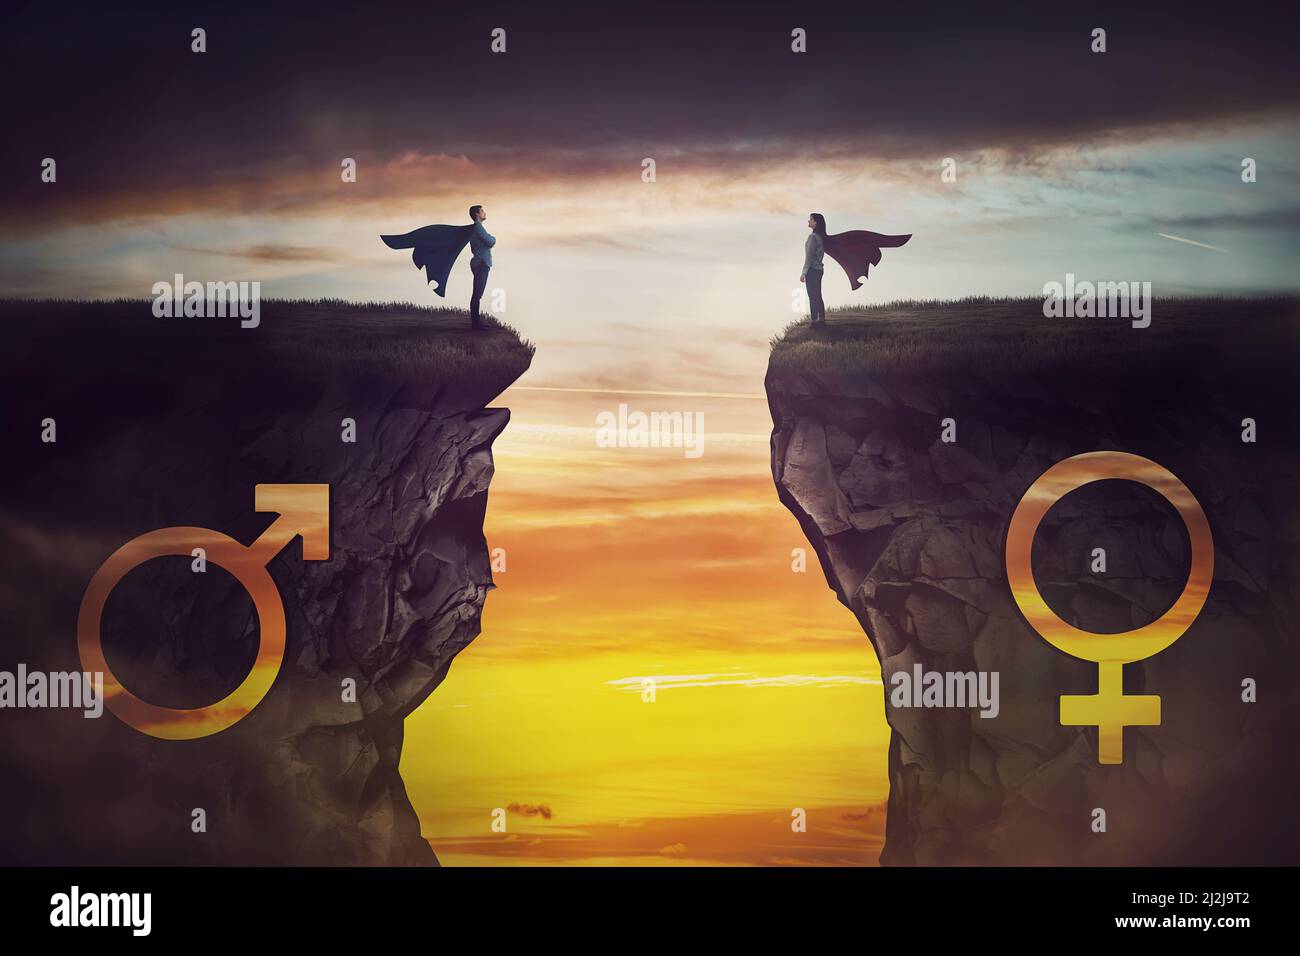 Superhero gender rivalry and leadership concept. Man vs woman heroes standing on the peak of different cliffs facing each other. Sex discrimination as Stock Photo